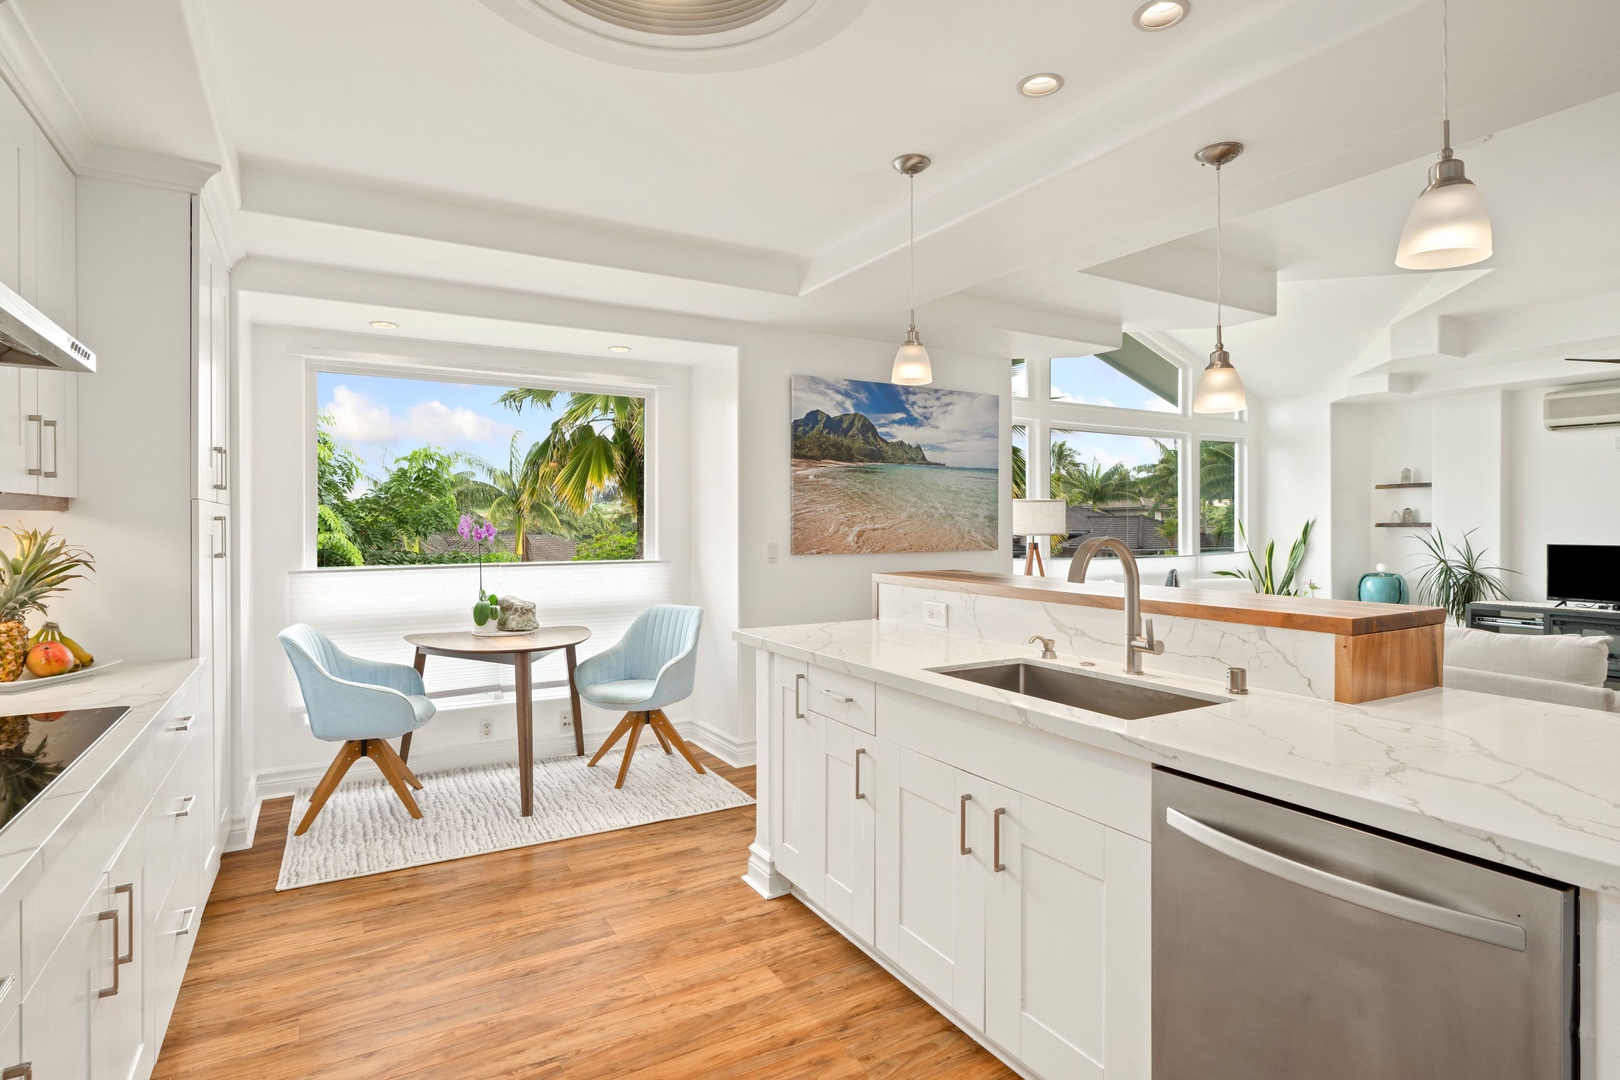 Princeville Vacation Rentals, Tropical Elegance - Spacious kitchen with scenic views, perfect for your getaway meals and relaxation.